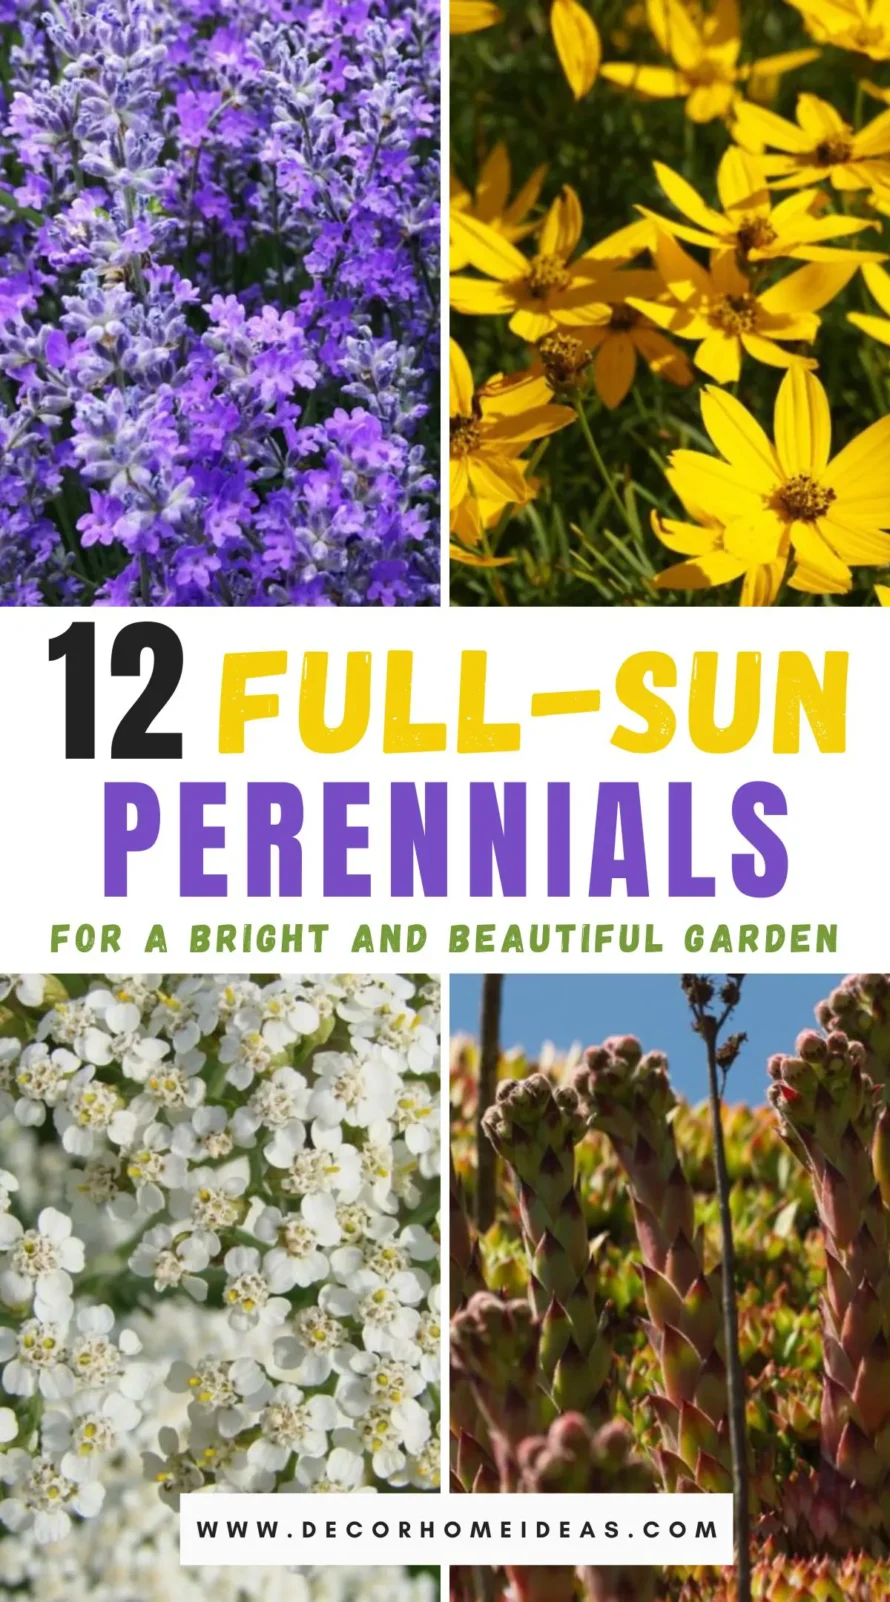 Discover 12 stunning perennials that adore full sunlight and thrive in its warmth. From vibrant blooms to hardy foliage, learn how to cultivate a radiant garden that flourishes under the sun's full glare. Perfect for gardeners seeking lasting brilliance!